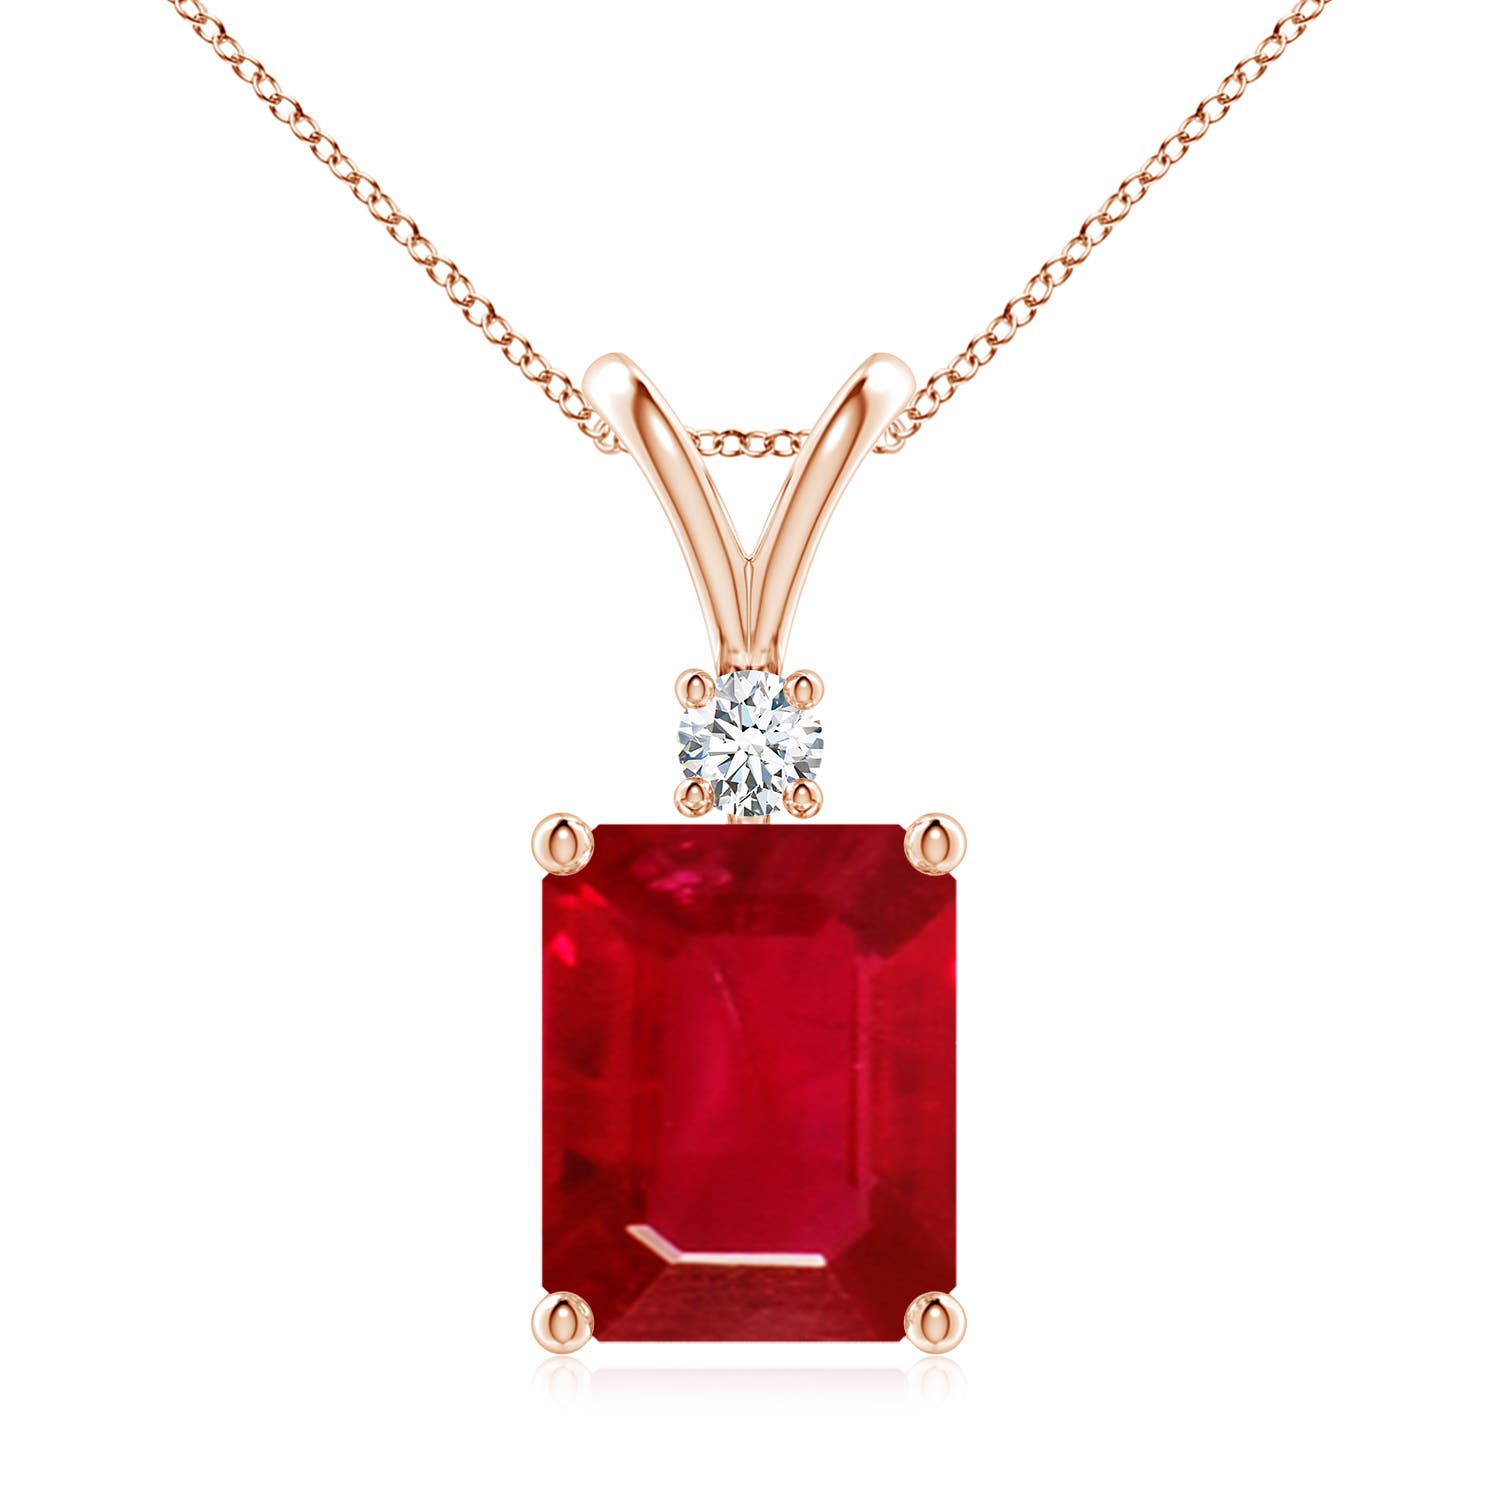 AAA - Ruby / 4.11 CT / 14 KT Rose Gold